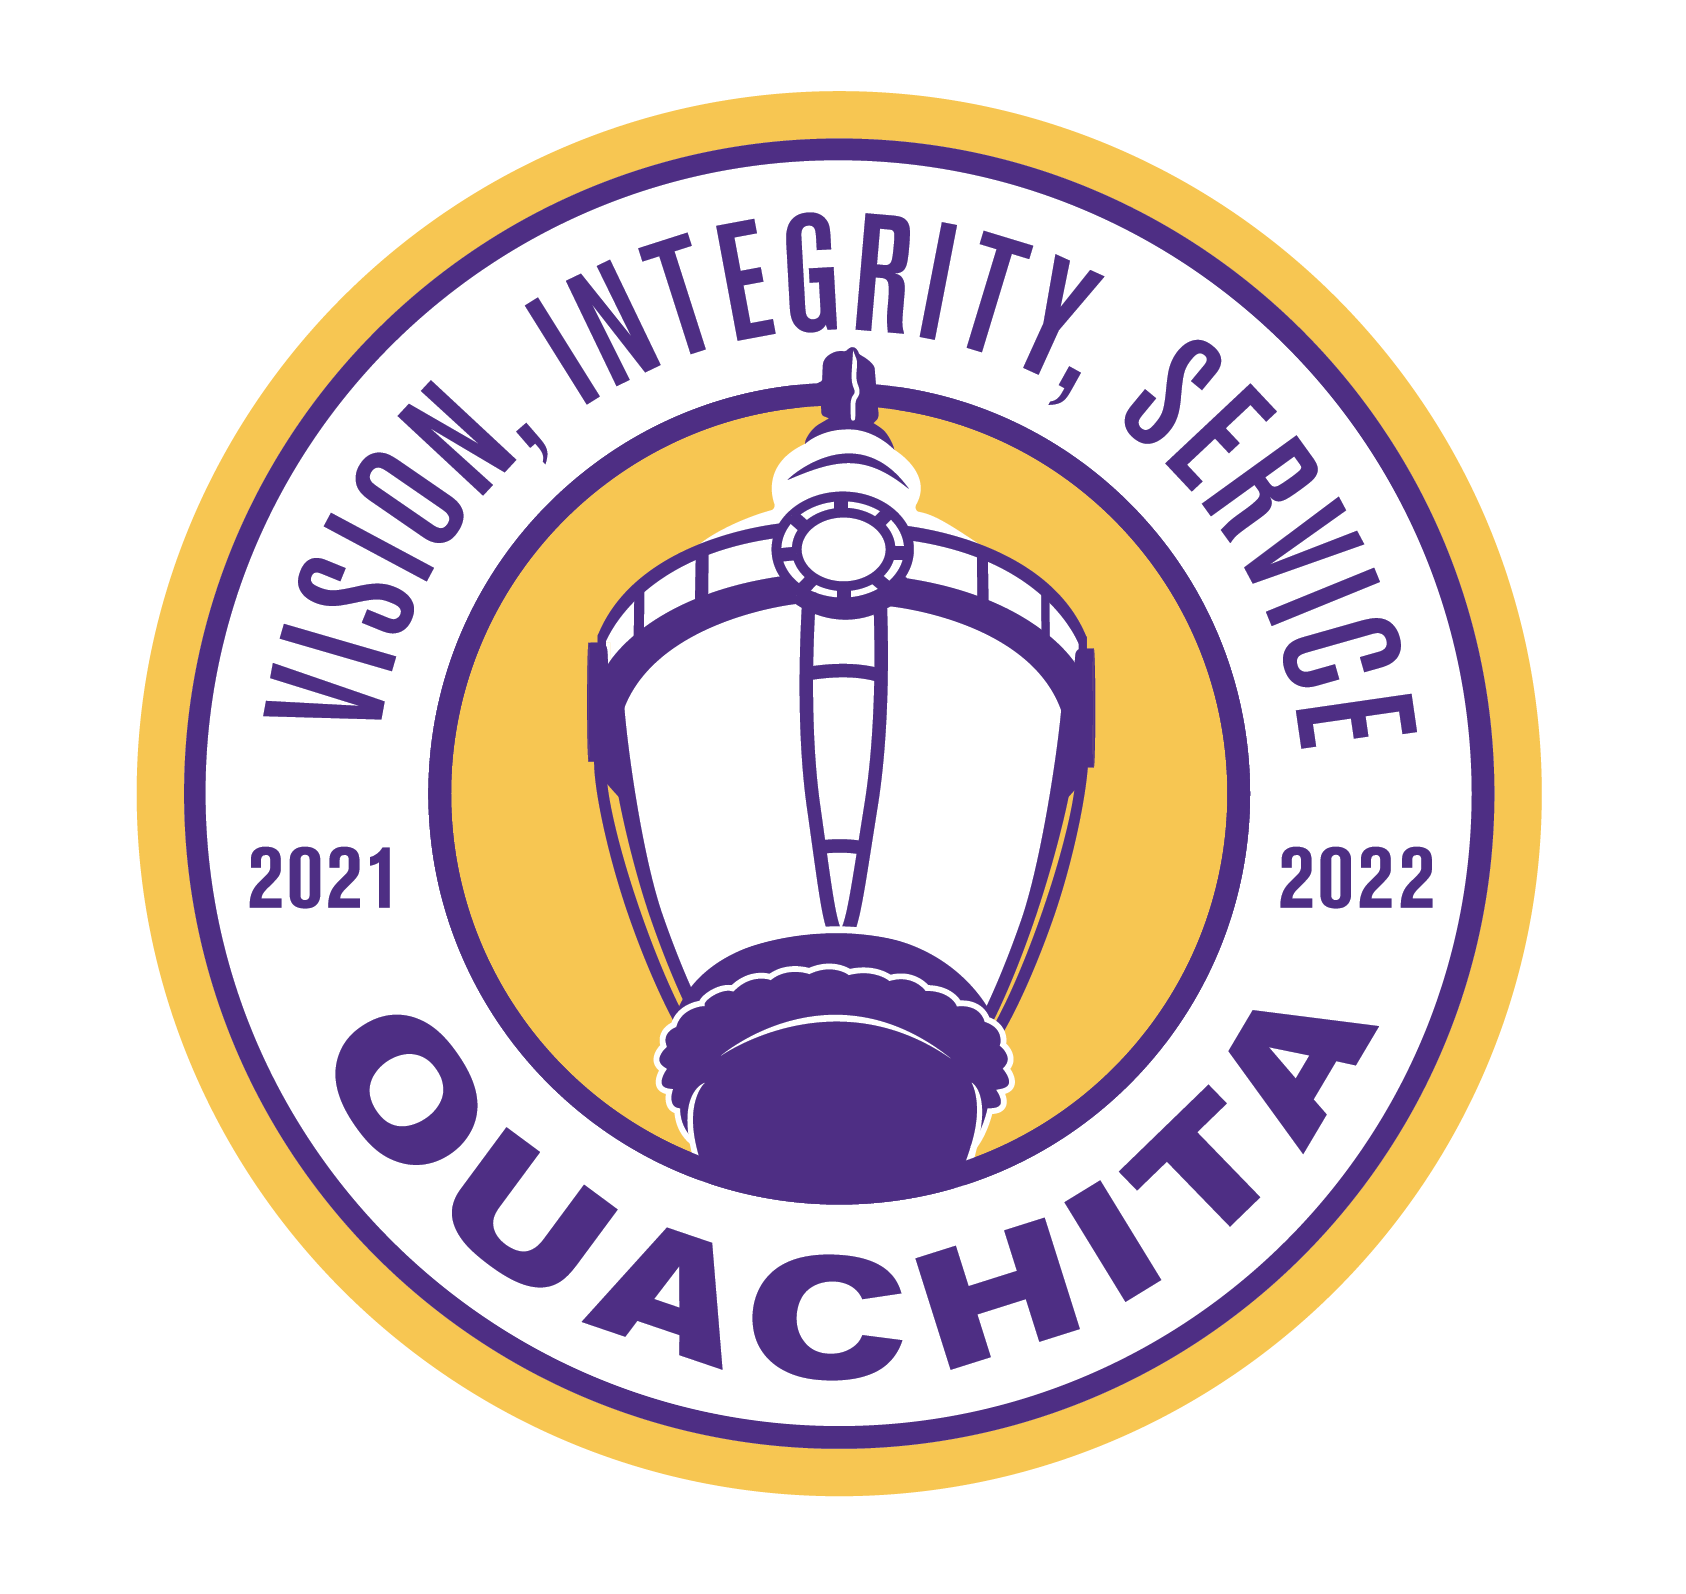 Vision, Integrity, Service Theme Patch